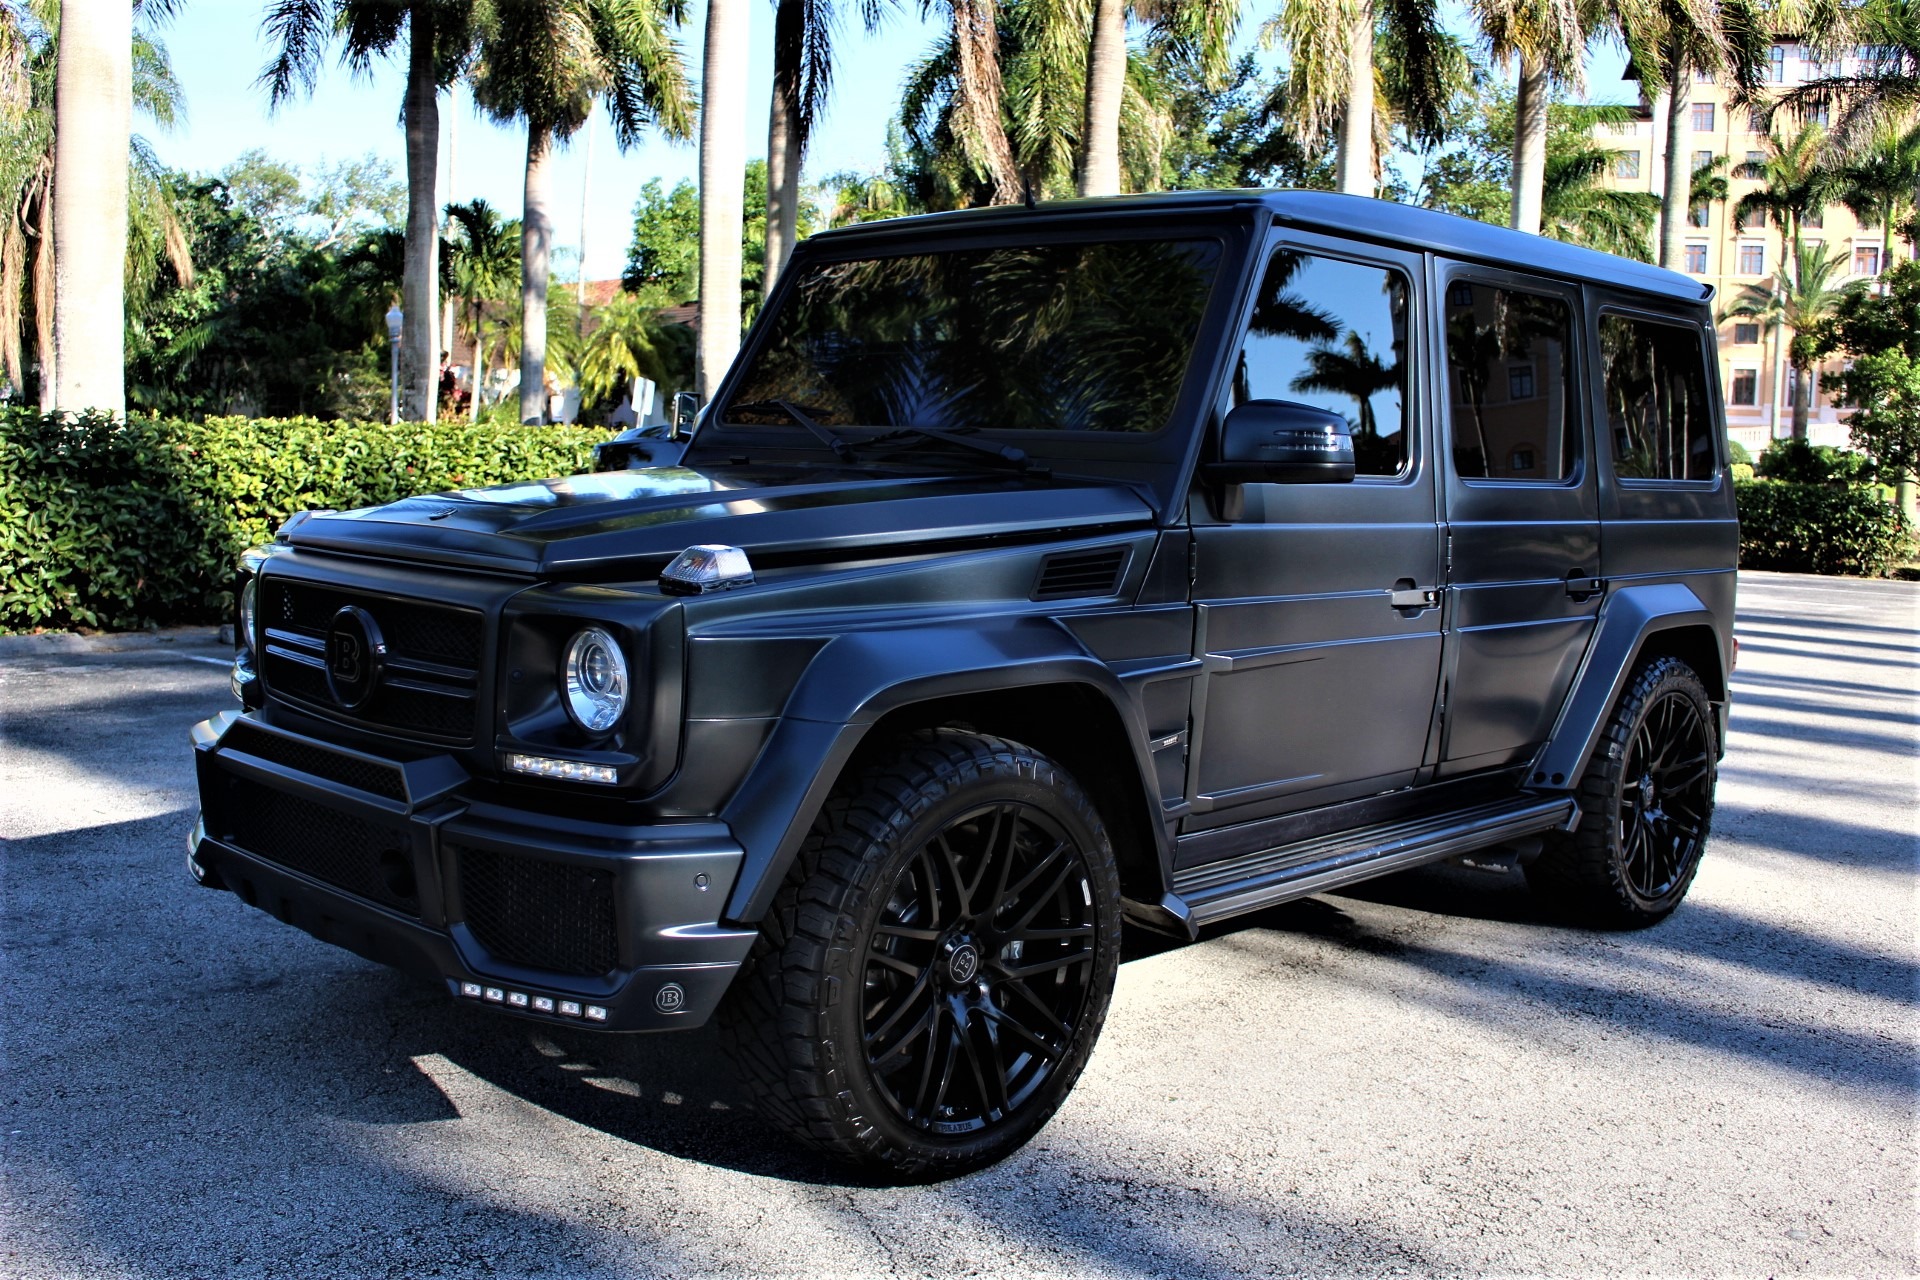 Used 13 Mercedes Benz G Class G 63 Amg Brabus For Sale 79 850 The Gables Sports Cars Stock 98